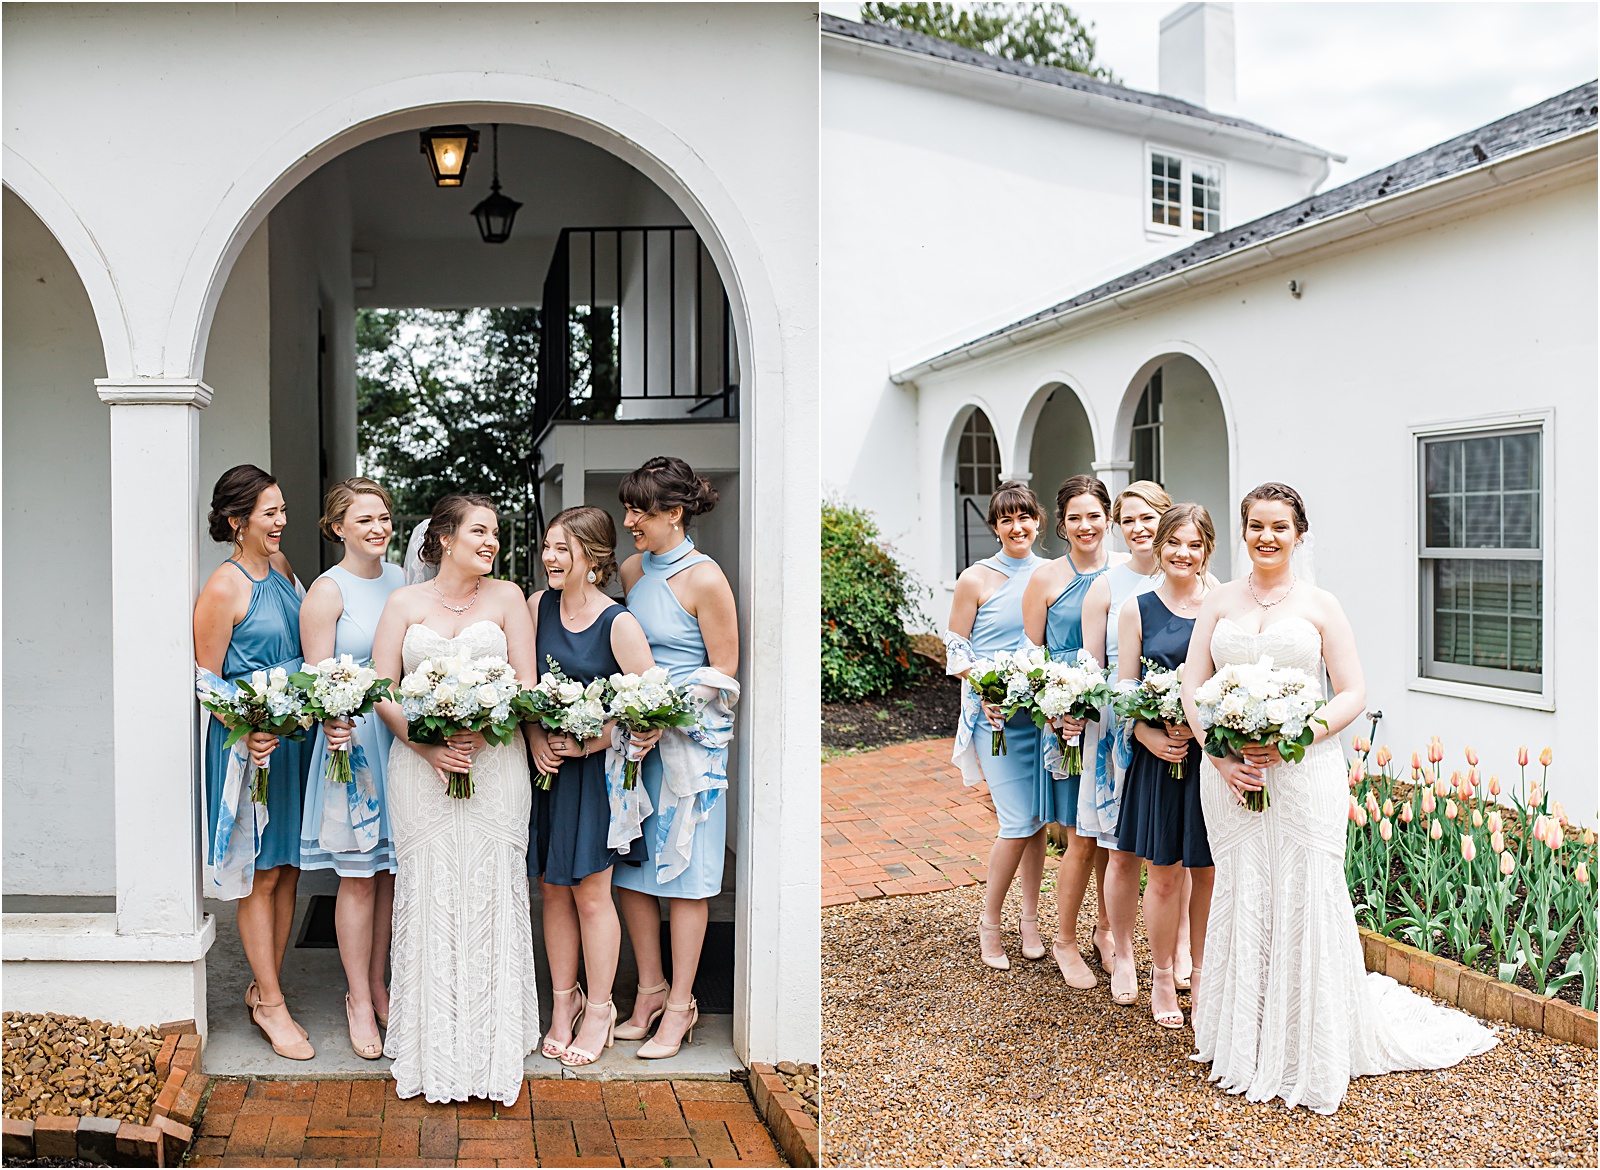 Always in Bloom Wedding Florist,Amber Lowe Photo,Bradford Catering,Crescent Bend,Impact Entertainment,Knoxville Wedding Photographer,Sweet Beginnings by Elaine,